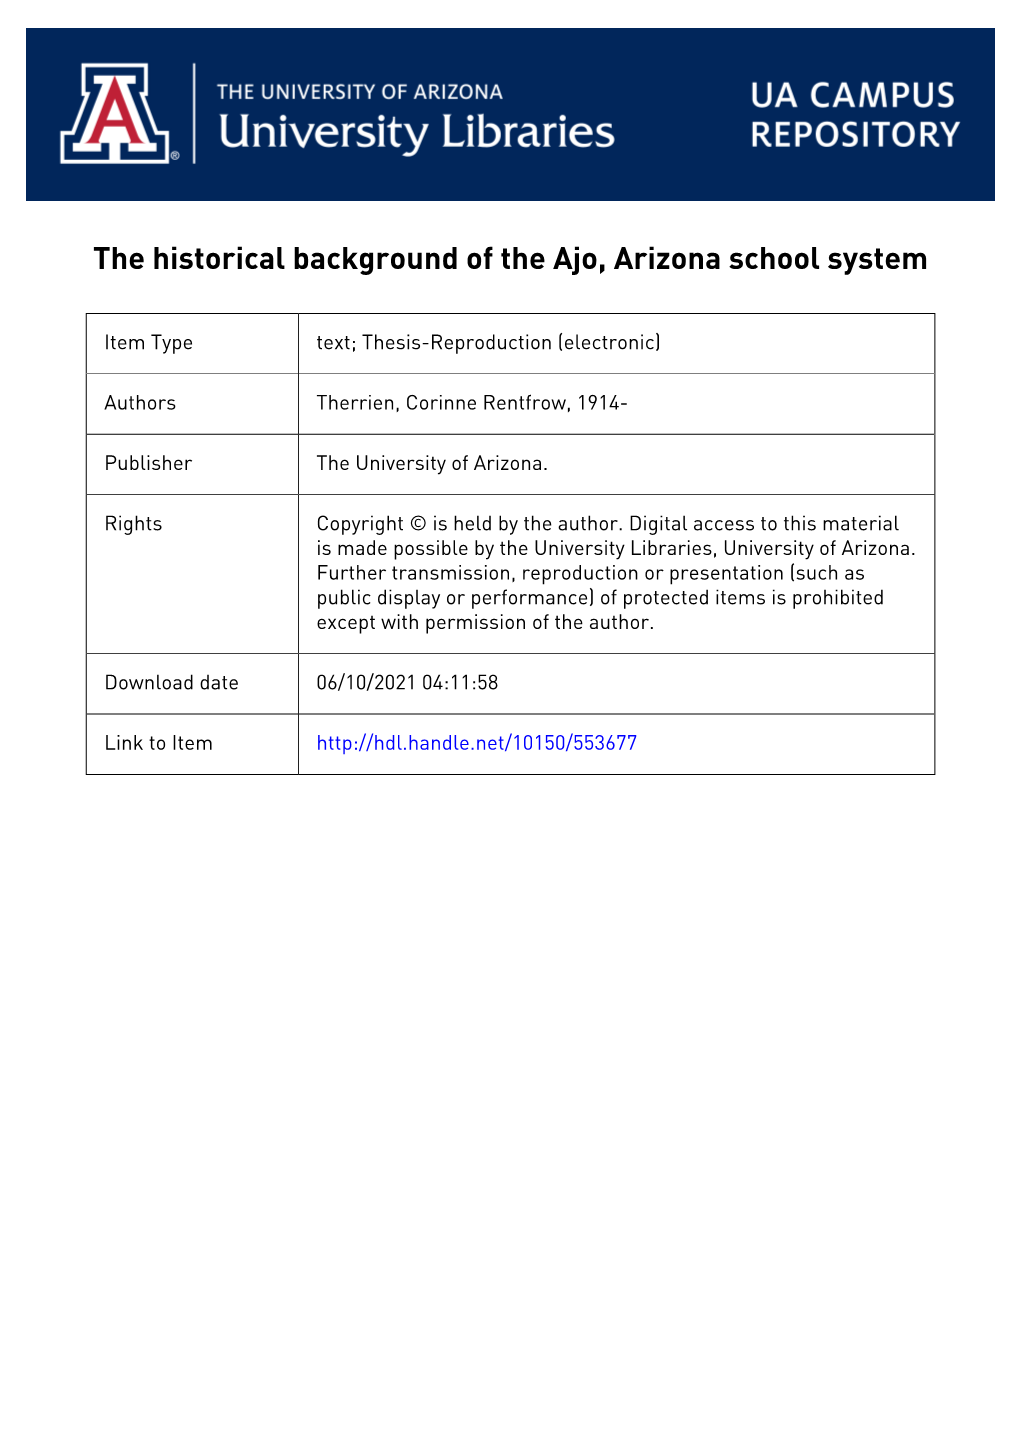 The Historical Background of the Ajo, Arizona, School